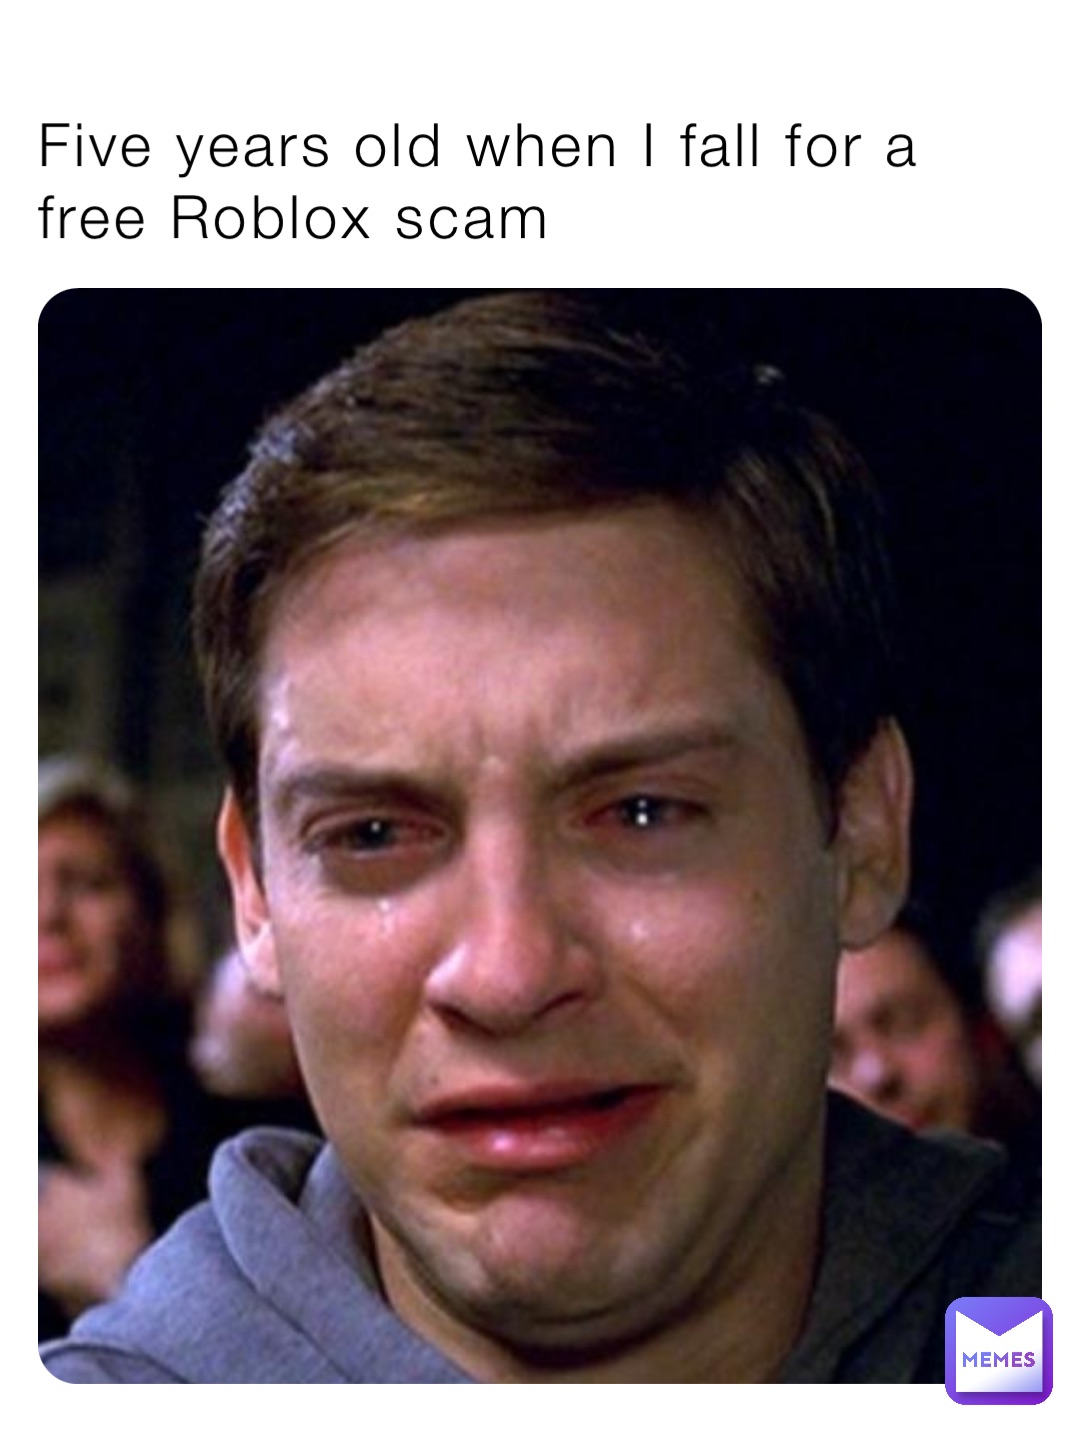 Five years old when I fall for a free Roblox scam